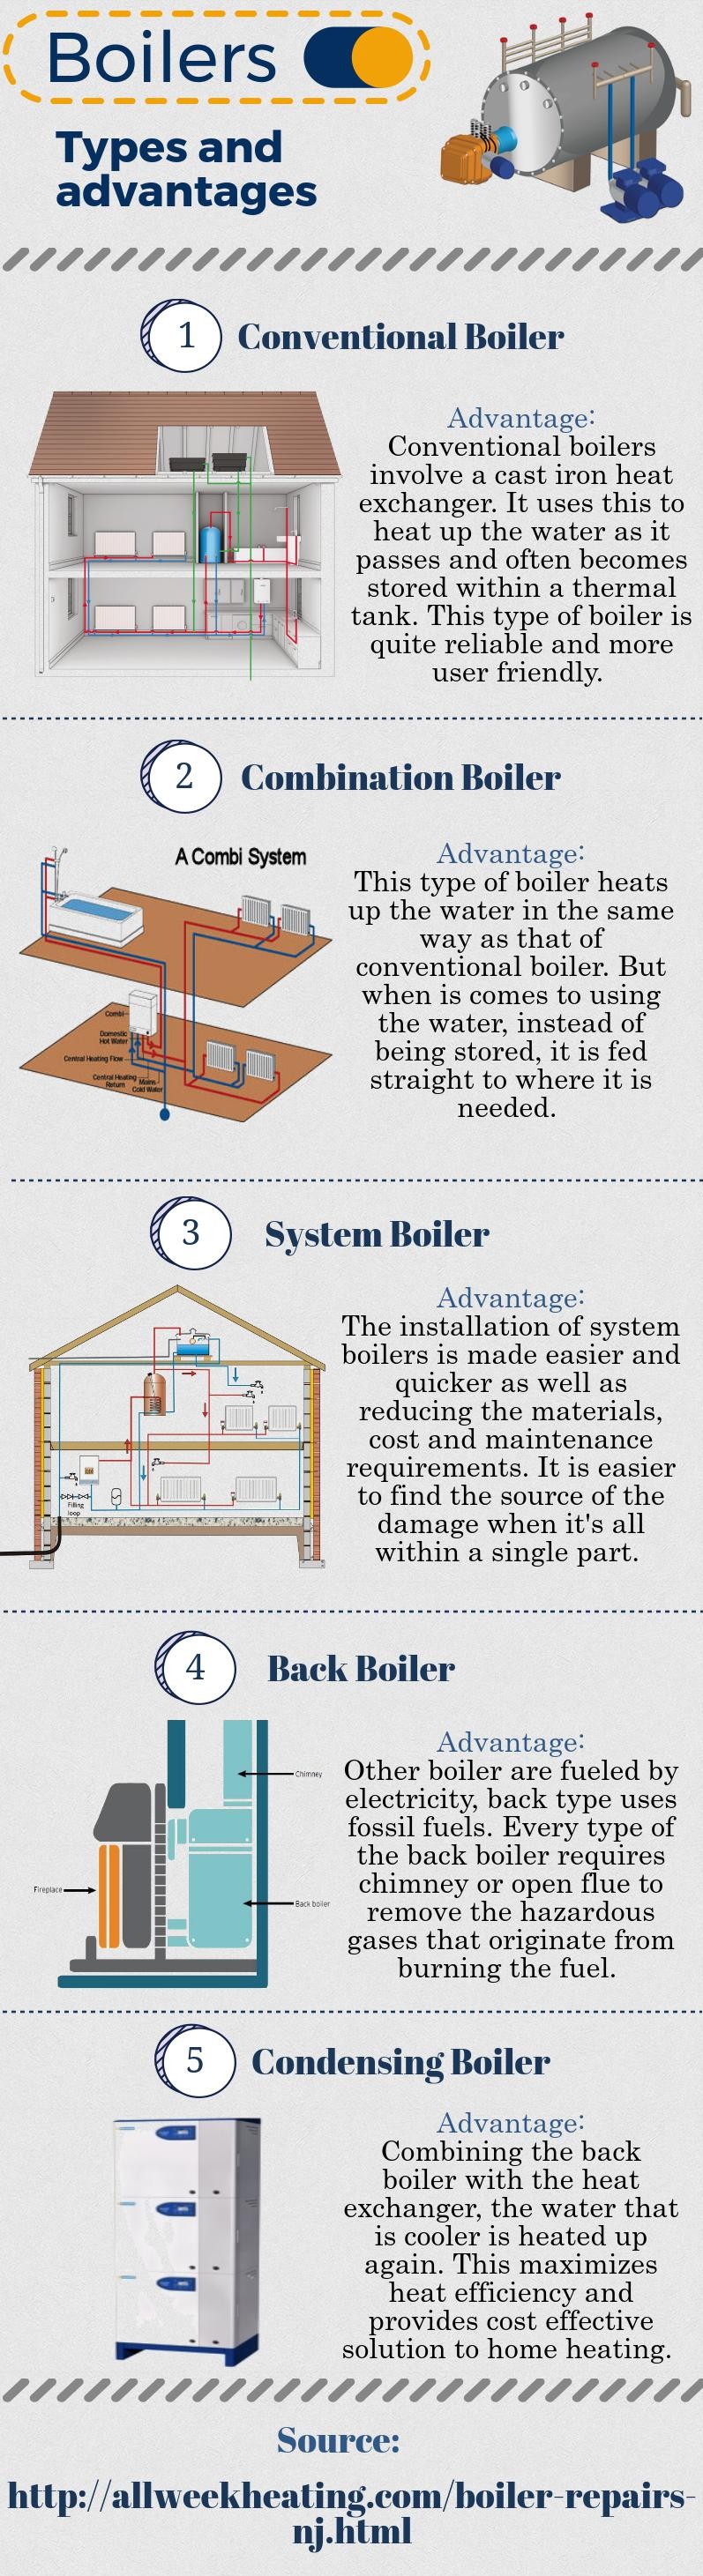 Most recent image: Boilers- Types And Advantages